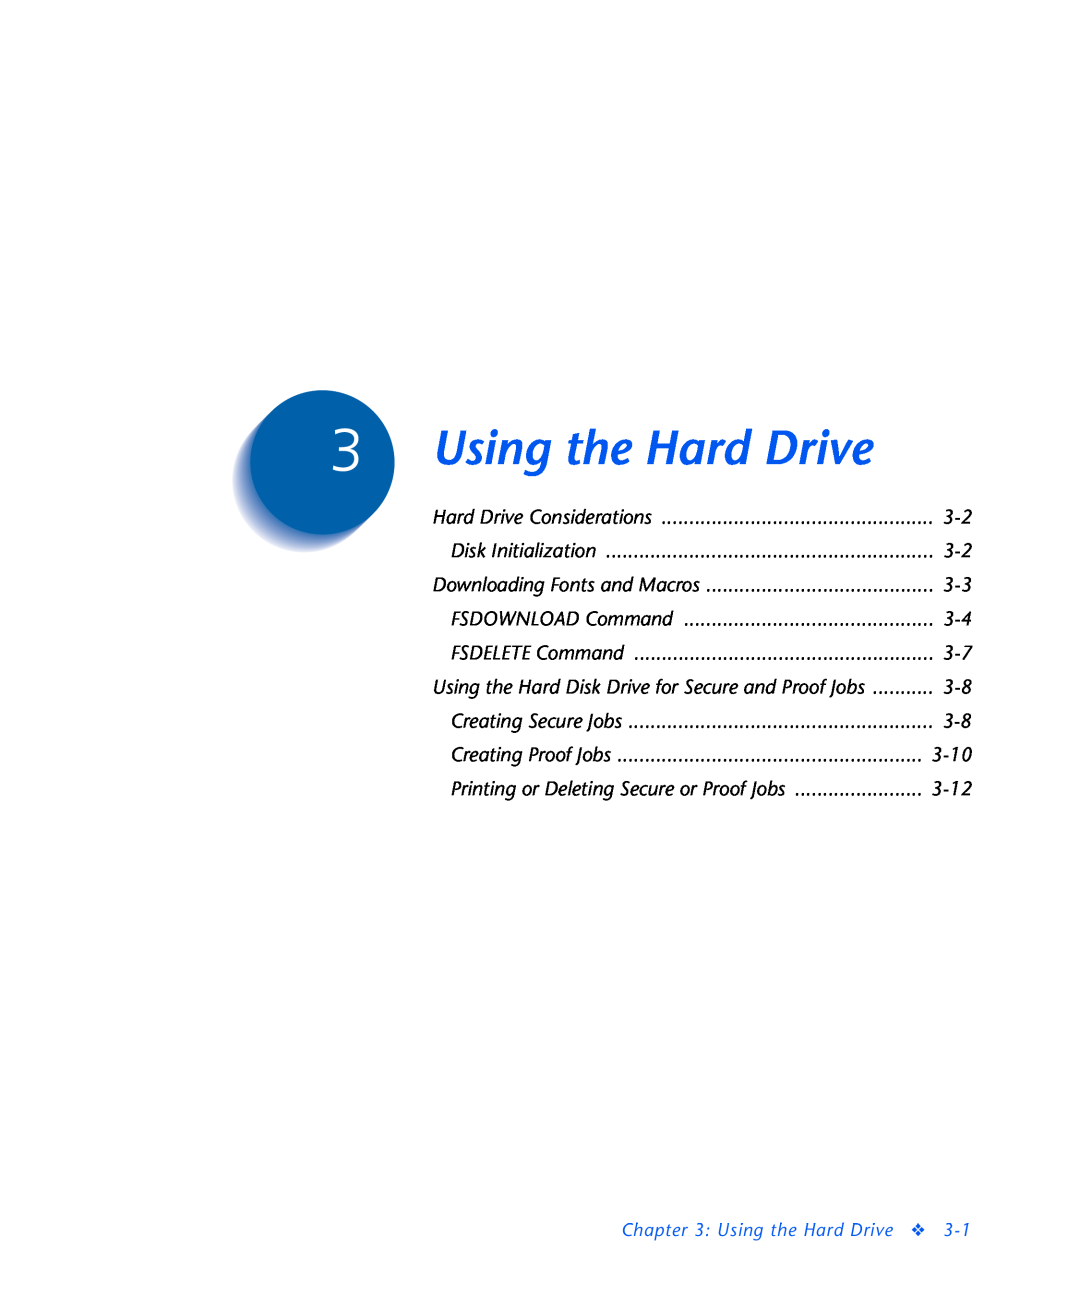 3D Innovations NC60 Using the Hard Drive, Hard Drive Considerations, Disk Initialization, Downloading Fonts and Macros 